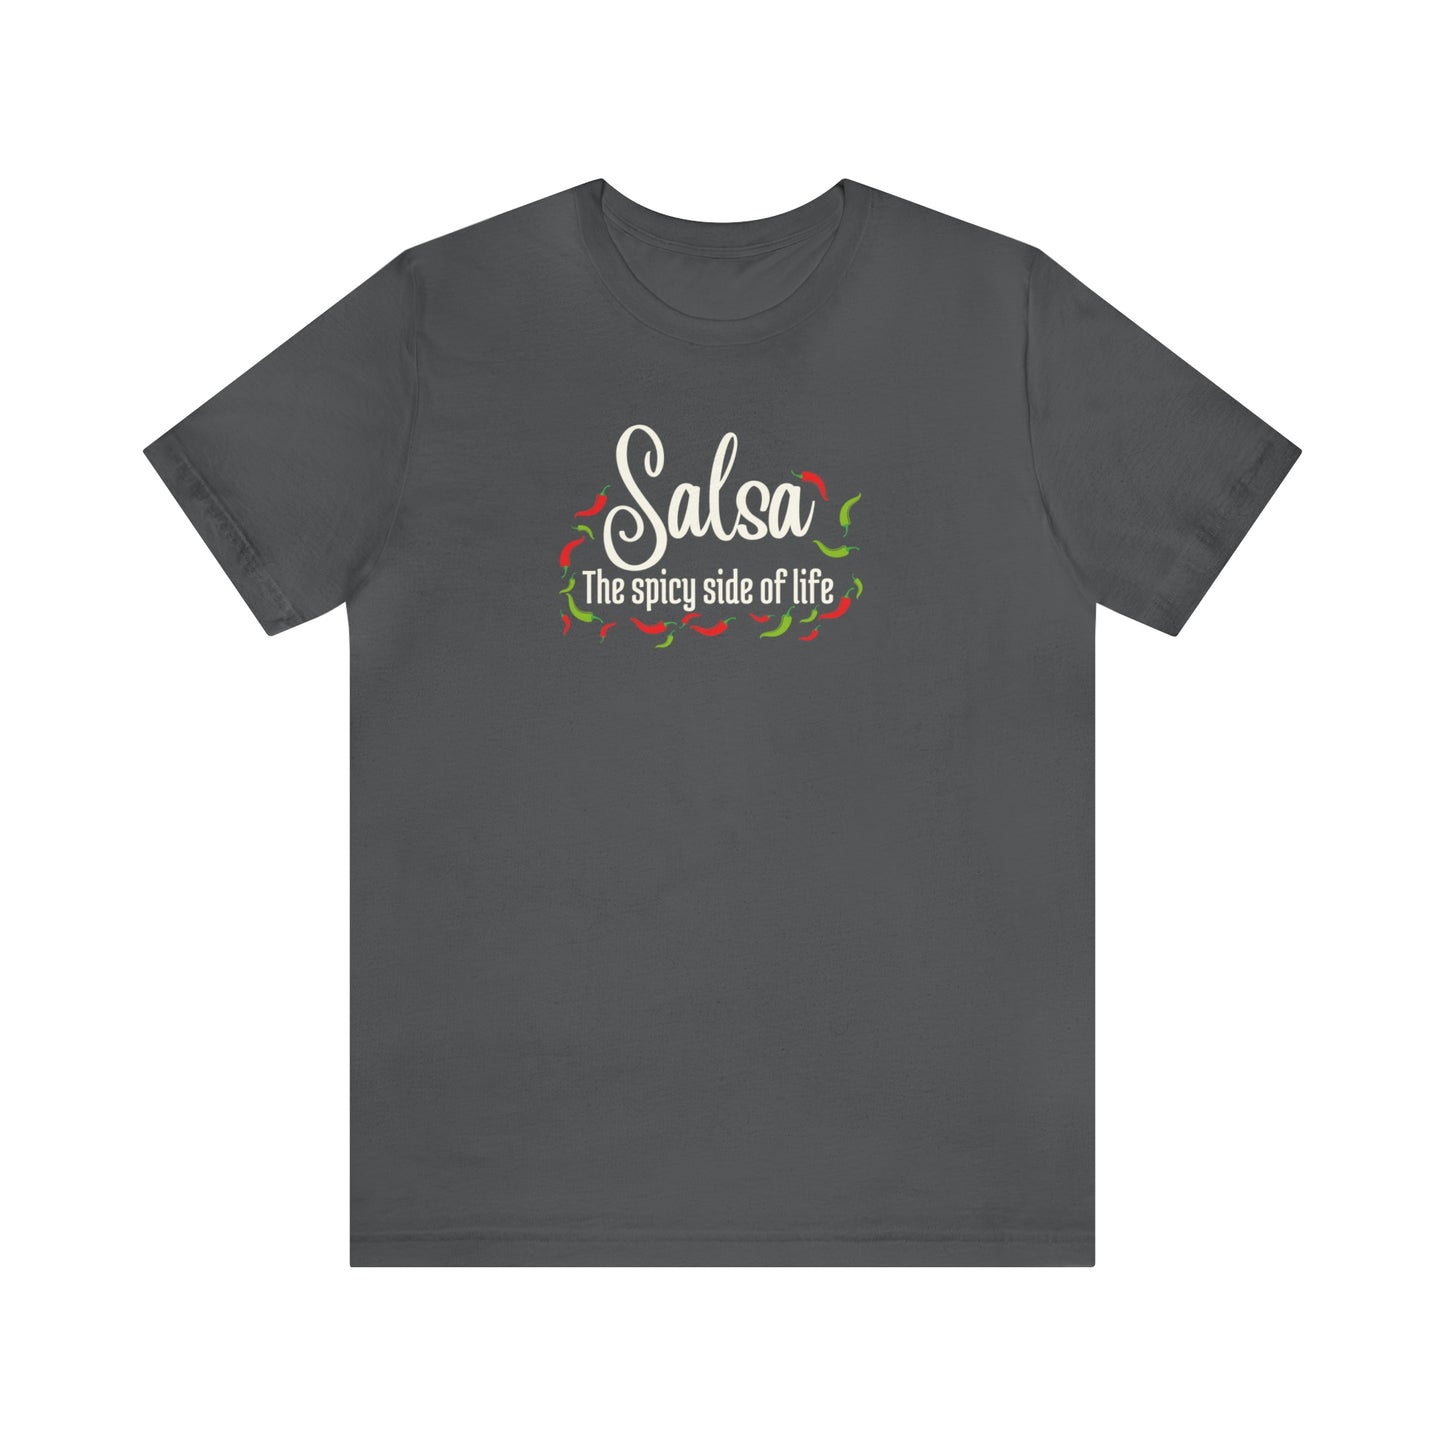 A salsa dance tshirt for salsa dancers with the text "Salsa the spicy side of life" and lots of pictures of small chilis surrounding it